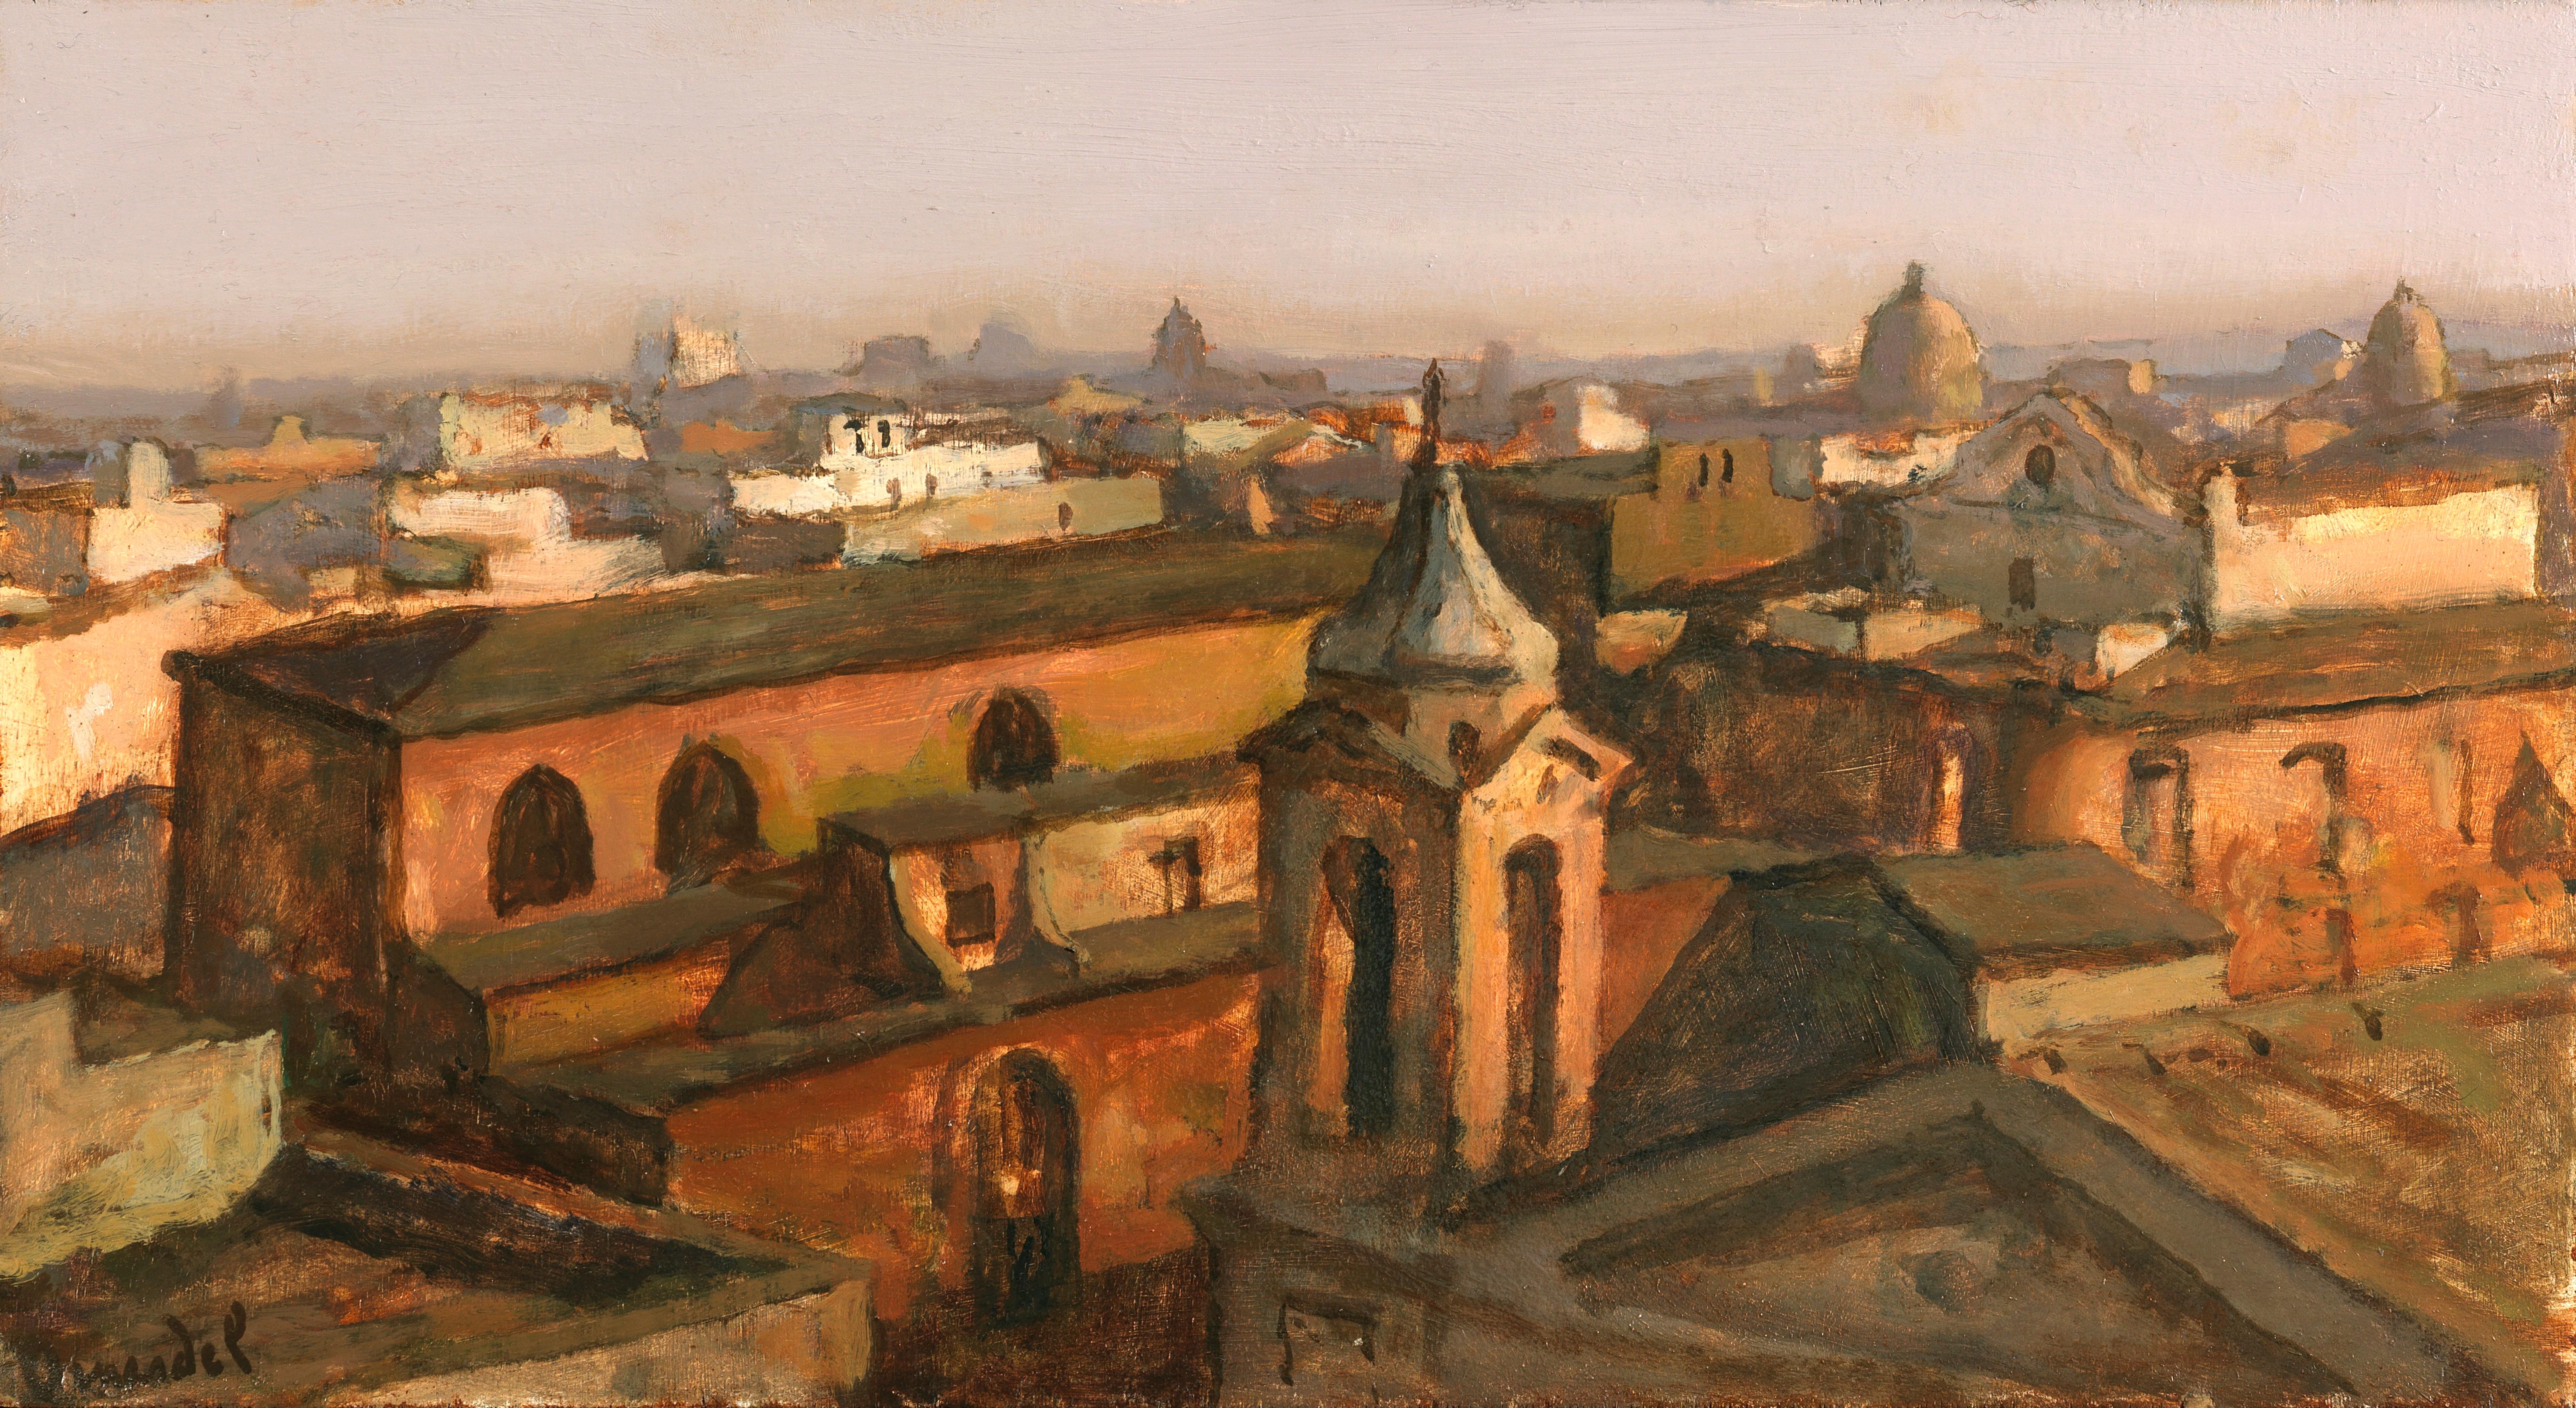 Rome, domes and convents - Painting by Pascal Vinardel 